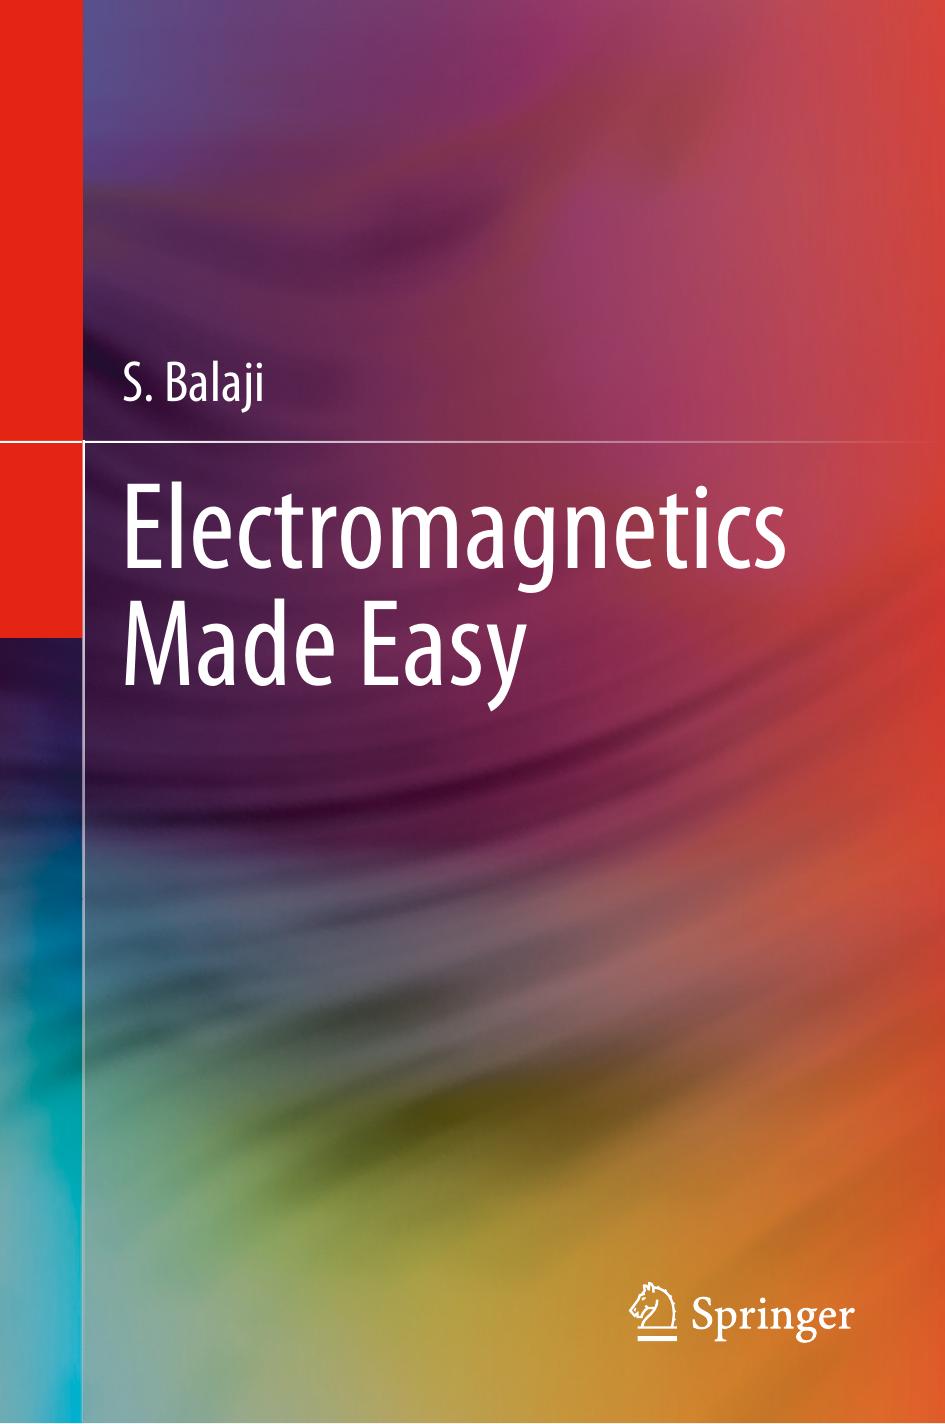 Electromagnetics Made Easy by S. Balaji